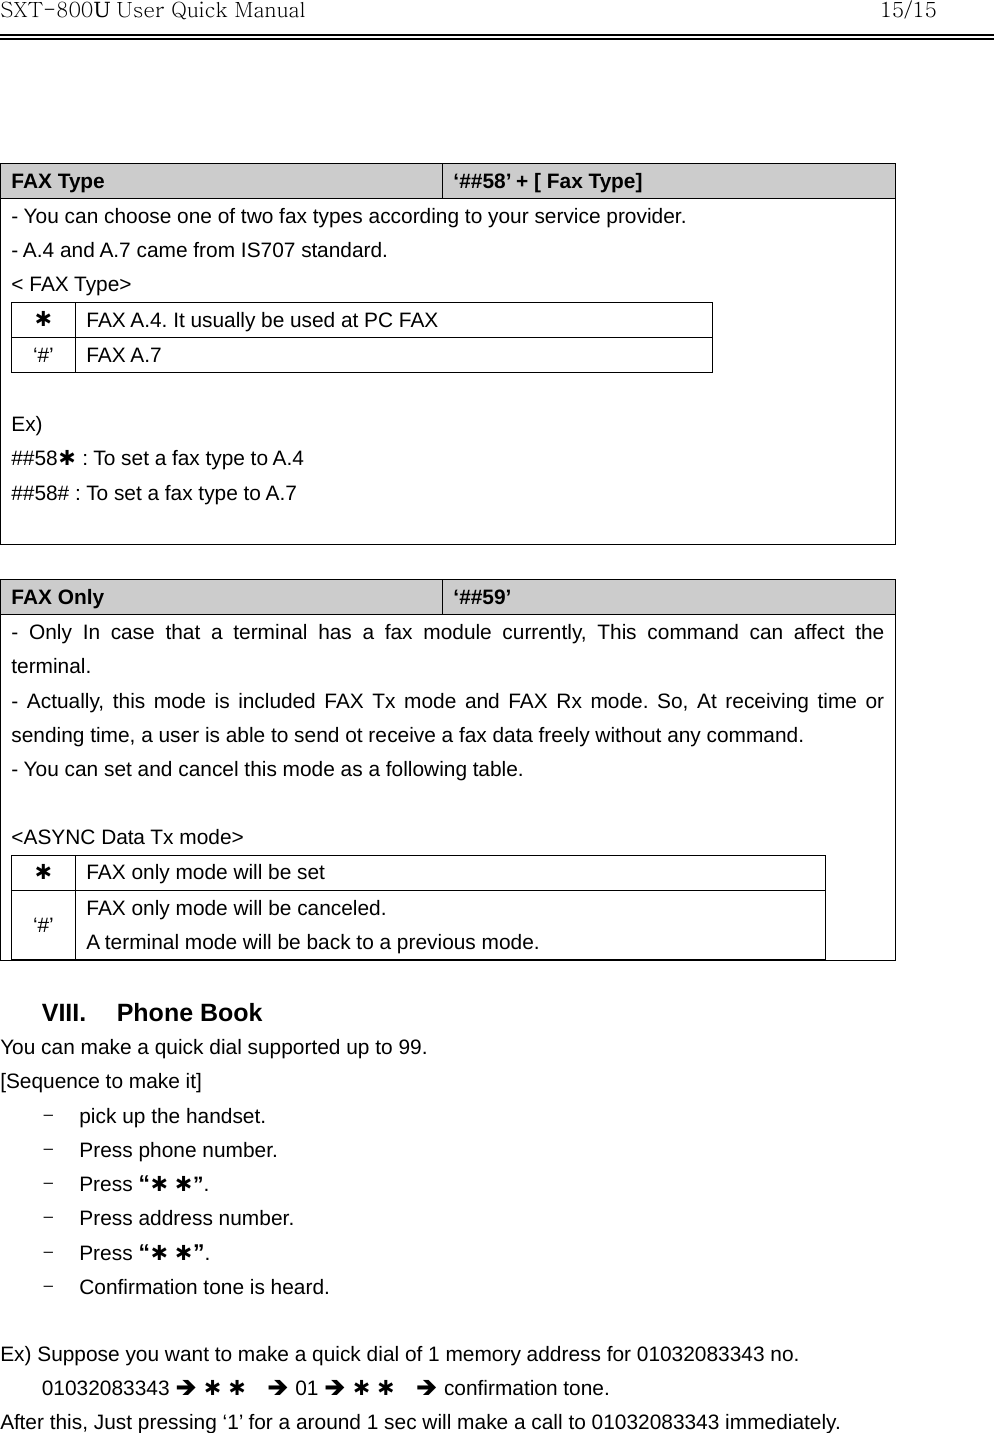 SXT-800U User Quick Manual           15/15     FAX Type  ‘##58’ + [ Fax Type] - You can choose one of two fax types according to your service provider. - A.4 and A.7 came from IS707 standard. &lt; FAX Type&gt; À FAX A.4. It usually be used at PC FAX   ‘#’ FAX A.7  Ex) ##58À : To set a fax type to A.4 ##58# : To set a fax type to A.7   FAX Only  ‘##59’ - Only In case that a terminal has a fax module currently, This command can affect the terminal. - Actually, this mode is included FAX Tx mode and FAX Rx mode. So, At receiving time or sending time, a user is able to send ot receive a fax data freely without any command. - You can set and cancel this mode as a following table.  &lt;ASYNC Data Tx mode&gt; À FAX only mode will be set ‘#’  FAX only mode will be canceled.   A terminal mode will be back to a previous mode.   VIII. Phone Book You can make a quick dial supported up to 99.   [Sequence to make it] -  pick up the handset. -  Press phone number. -  Press “À À”. -  Press address number. -  Press “À À”. -  Confirmation tone is heard.  Ex) Suppose you want to make a quick dial of 1 memory address for 01032083343 no. 01032083343 Î À À  Î 01 Î À À  Î confirmation tone. After this, Just pressing ‘1’ for a around 1 sec will make a call to 01032083343 immediately. 